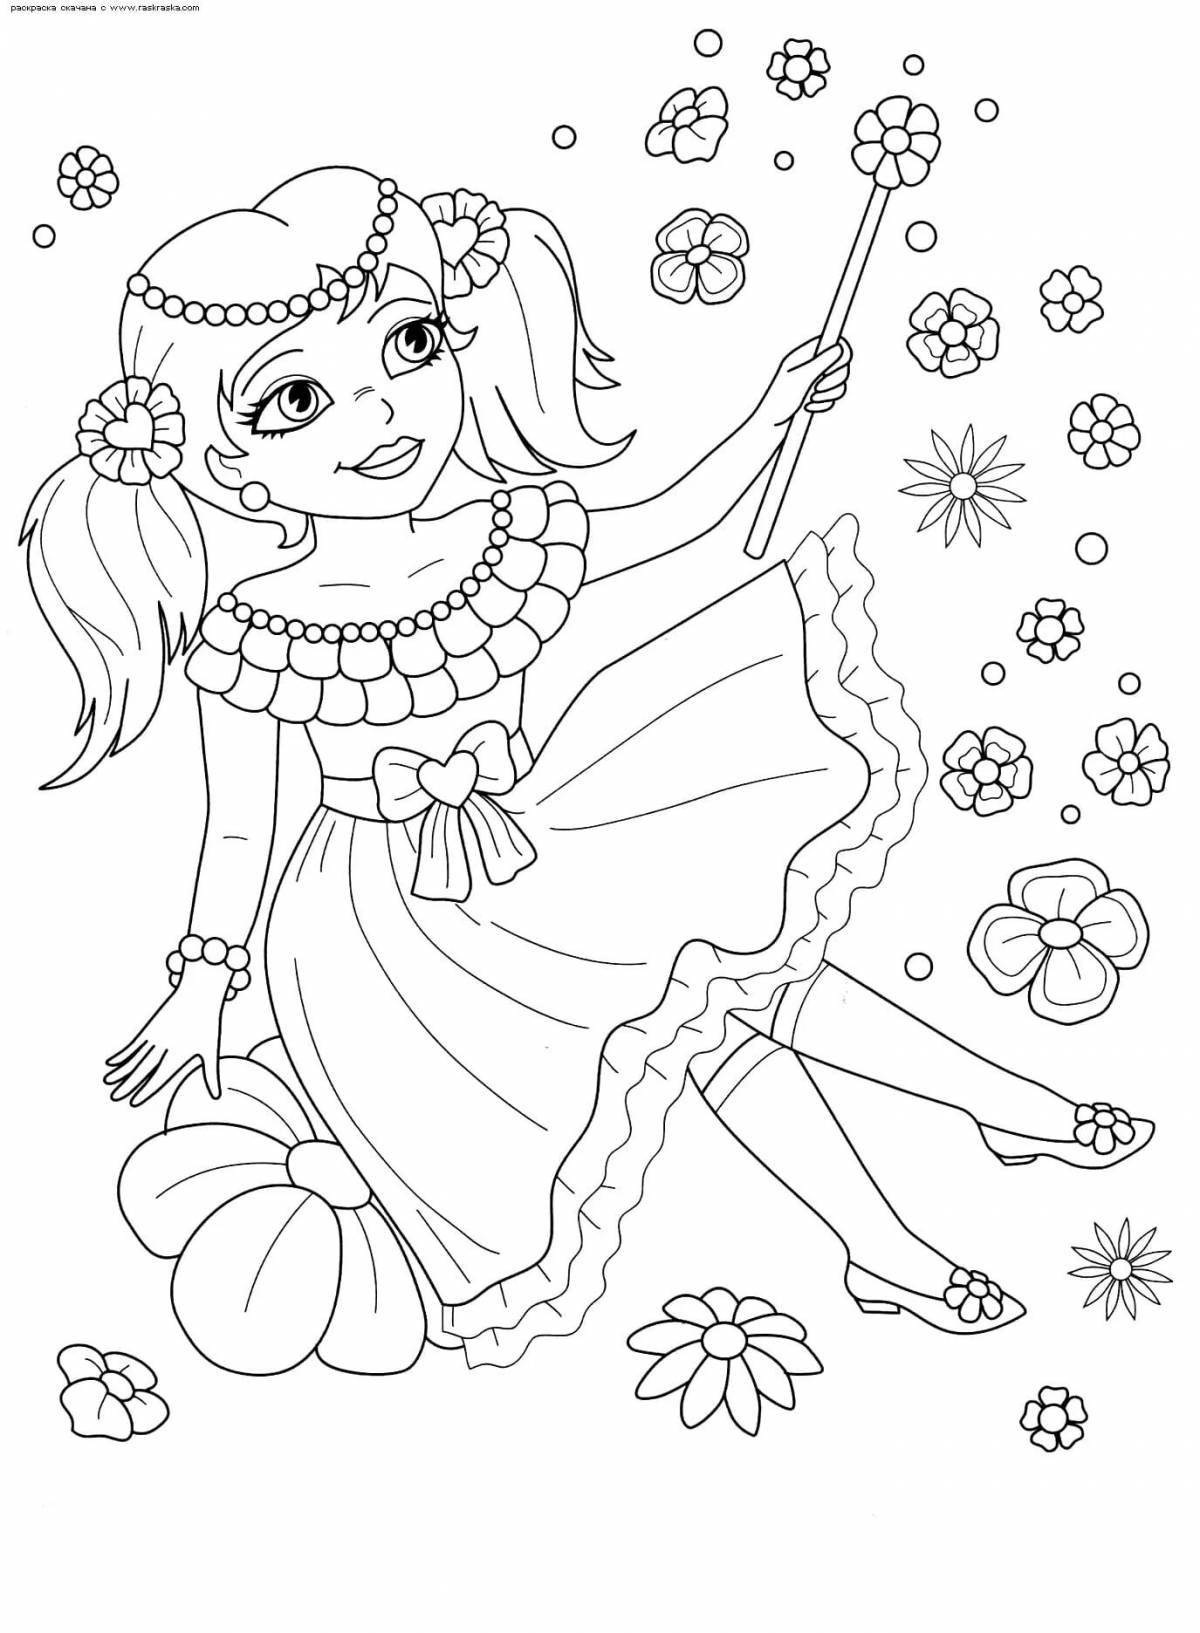 Dazzling coloring book for princess girls 5-6 years old